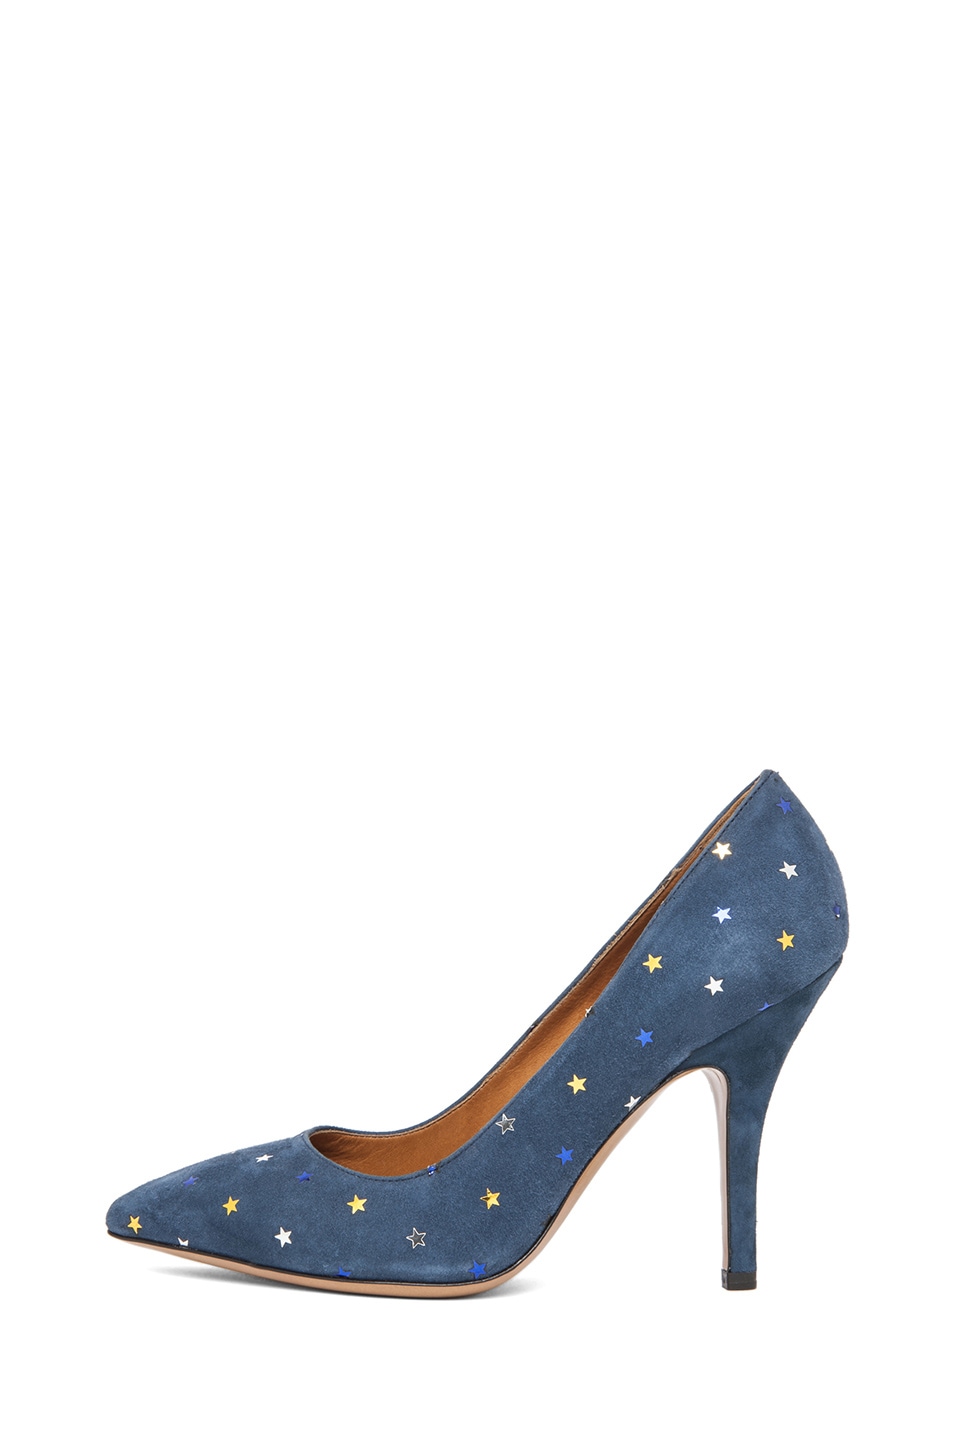 Image 1 of Isabel Marant Anaid Suede Star Pumps in Navy